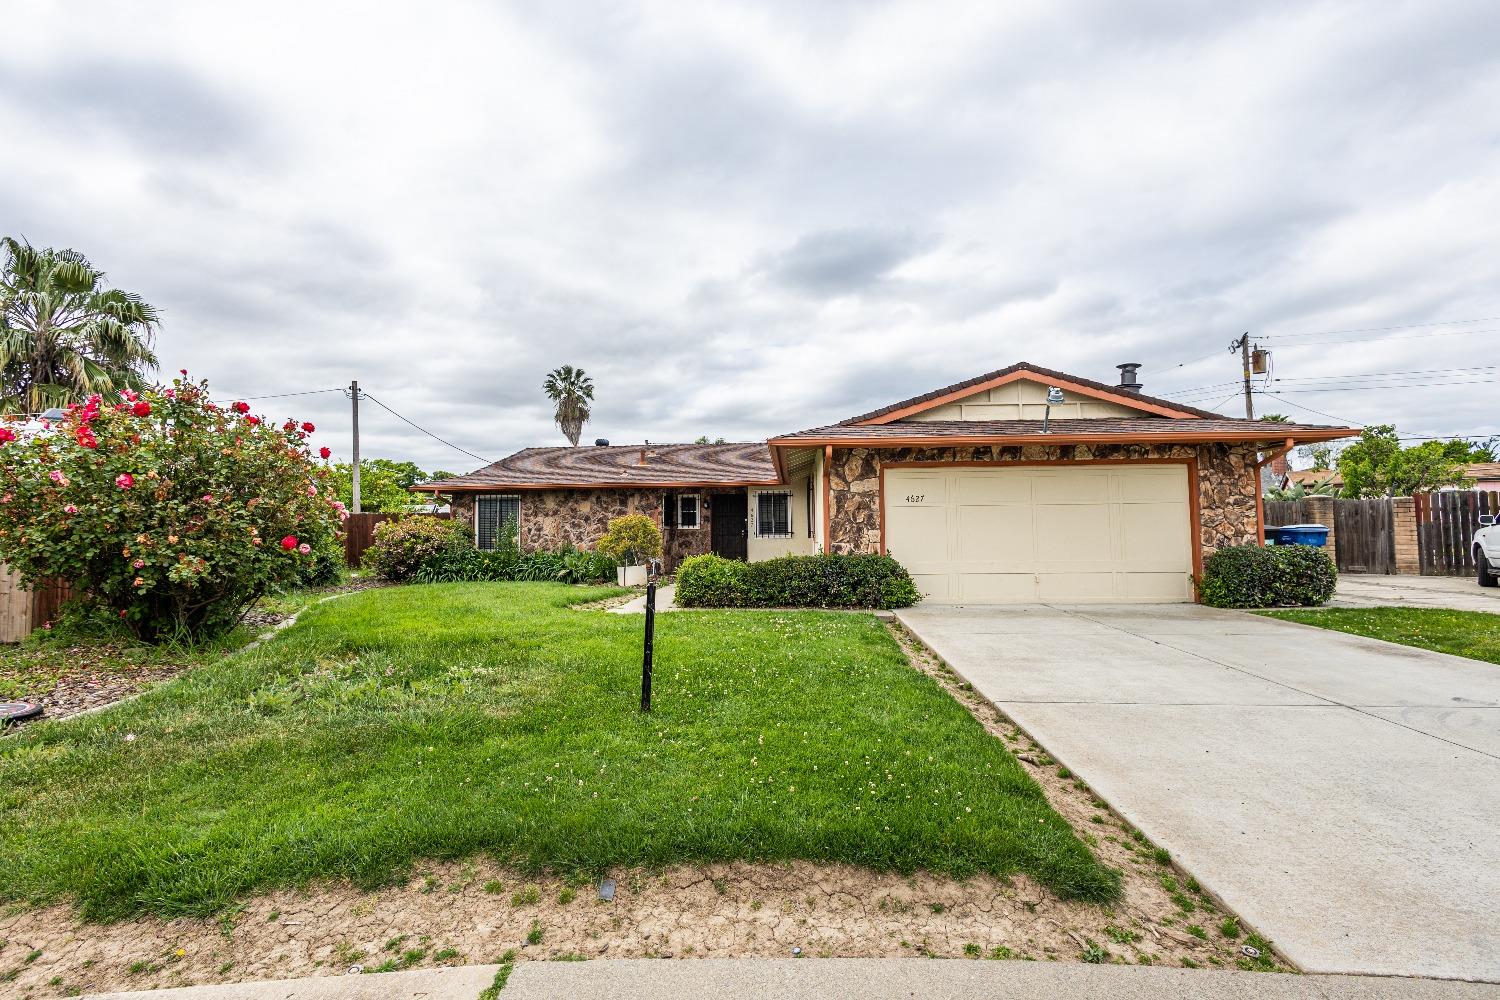 Photo of 4627 Bruning Ct in Sacramento, CA